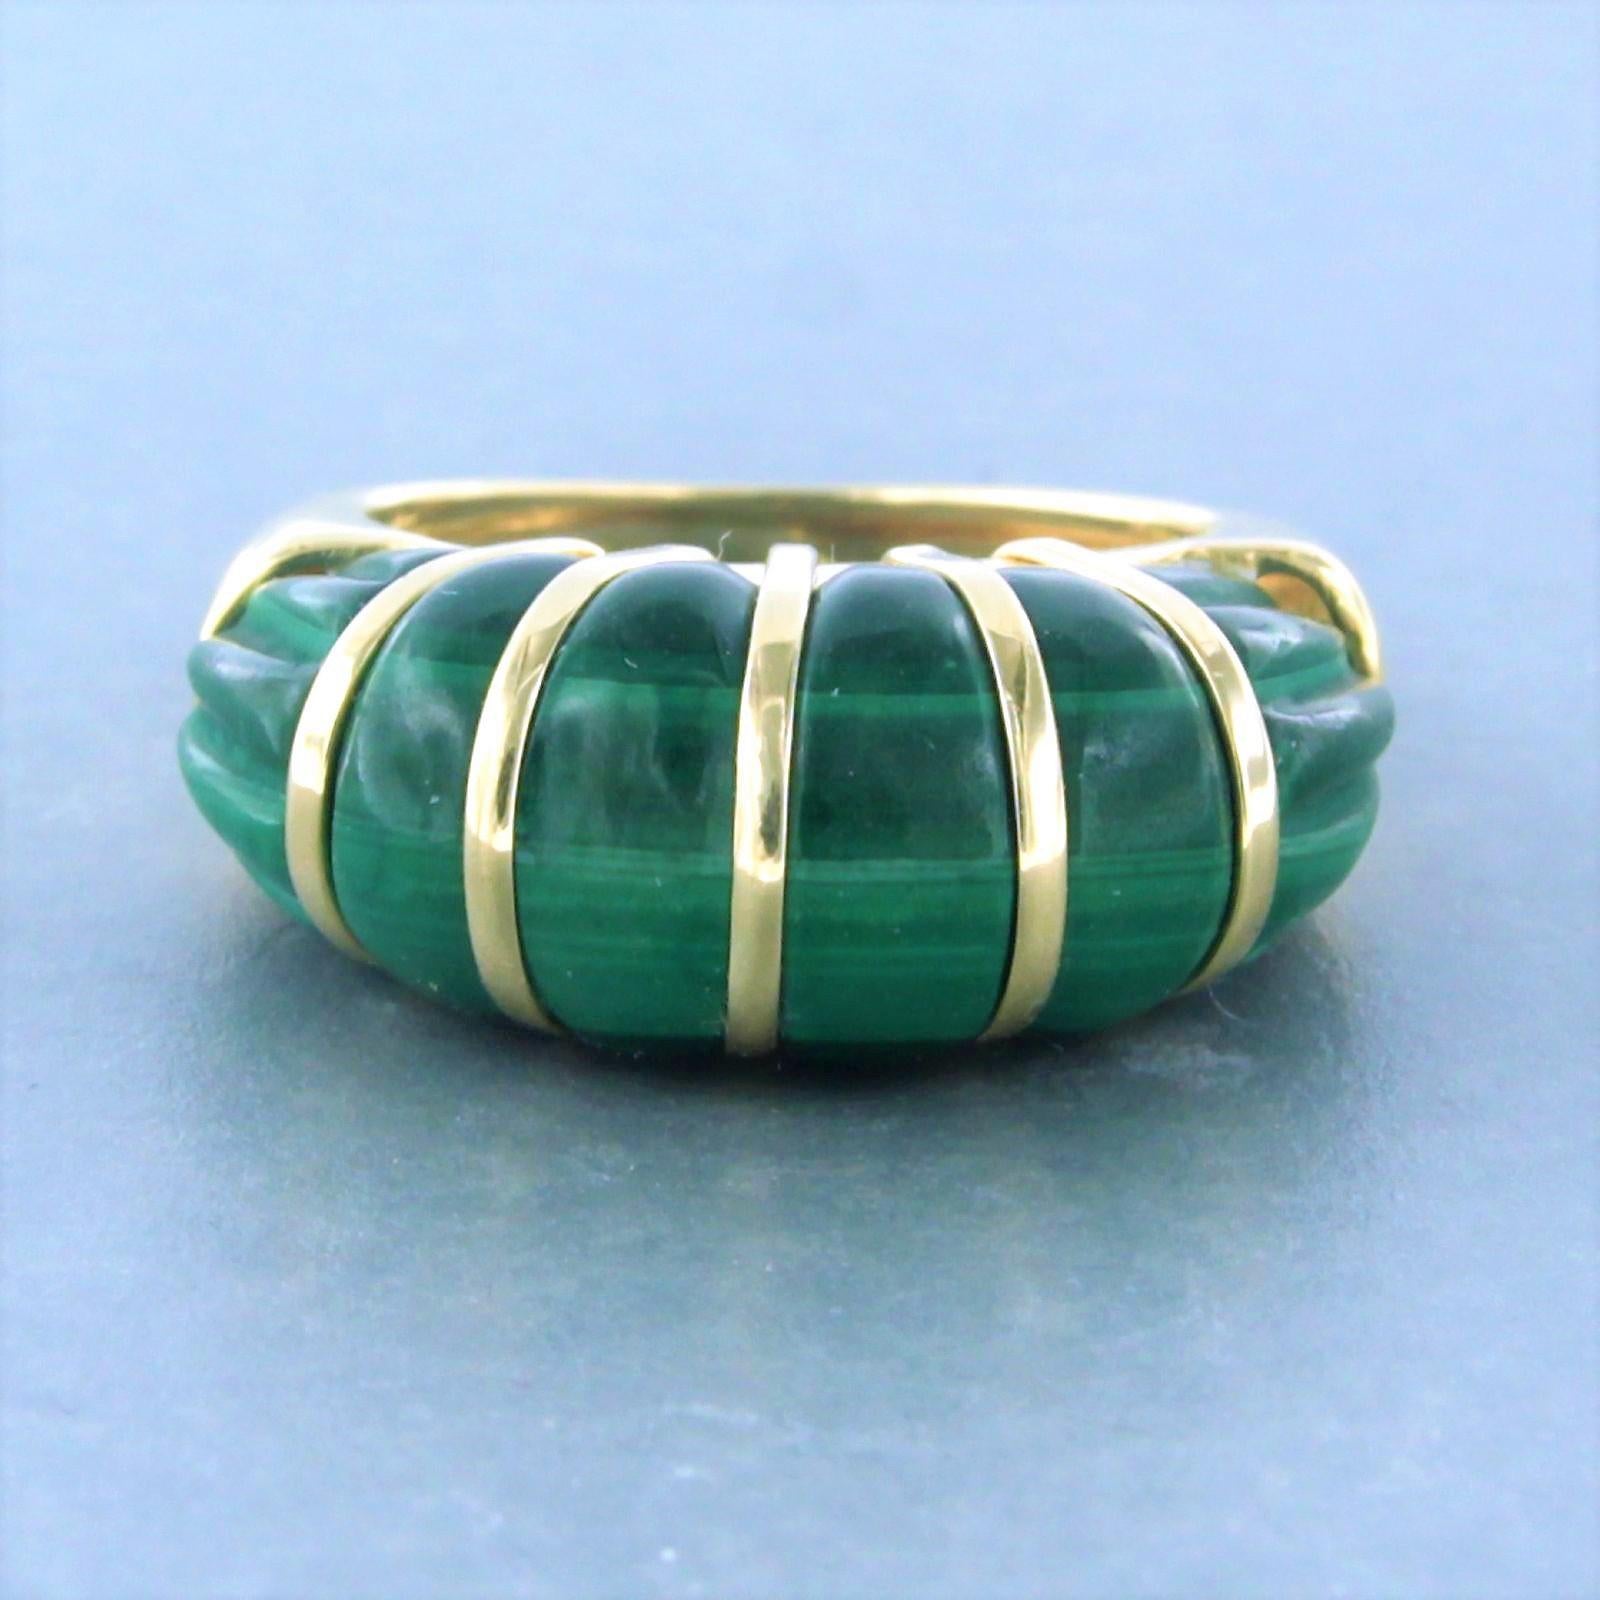 14 kt yellow gold ring set with malachite - ring size U.S. 4.5 - EU. 15.5(49)

detailed description

the top of the ring is 9.1 mm wide and 1.0 cm high

Ring size U.S. 4.5 - EU. 15.5(49), ring can be reduced a few sizes at cost price. Please contact